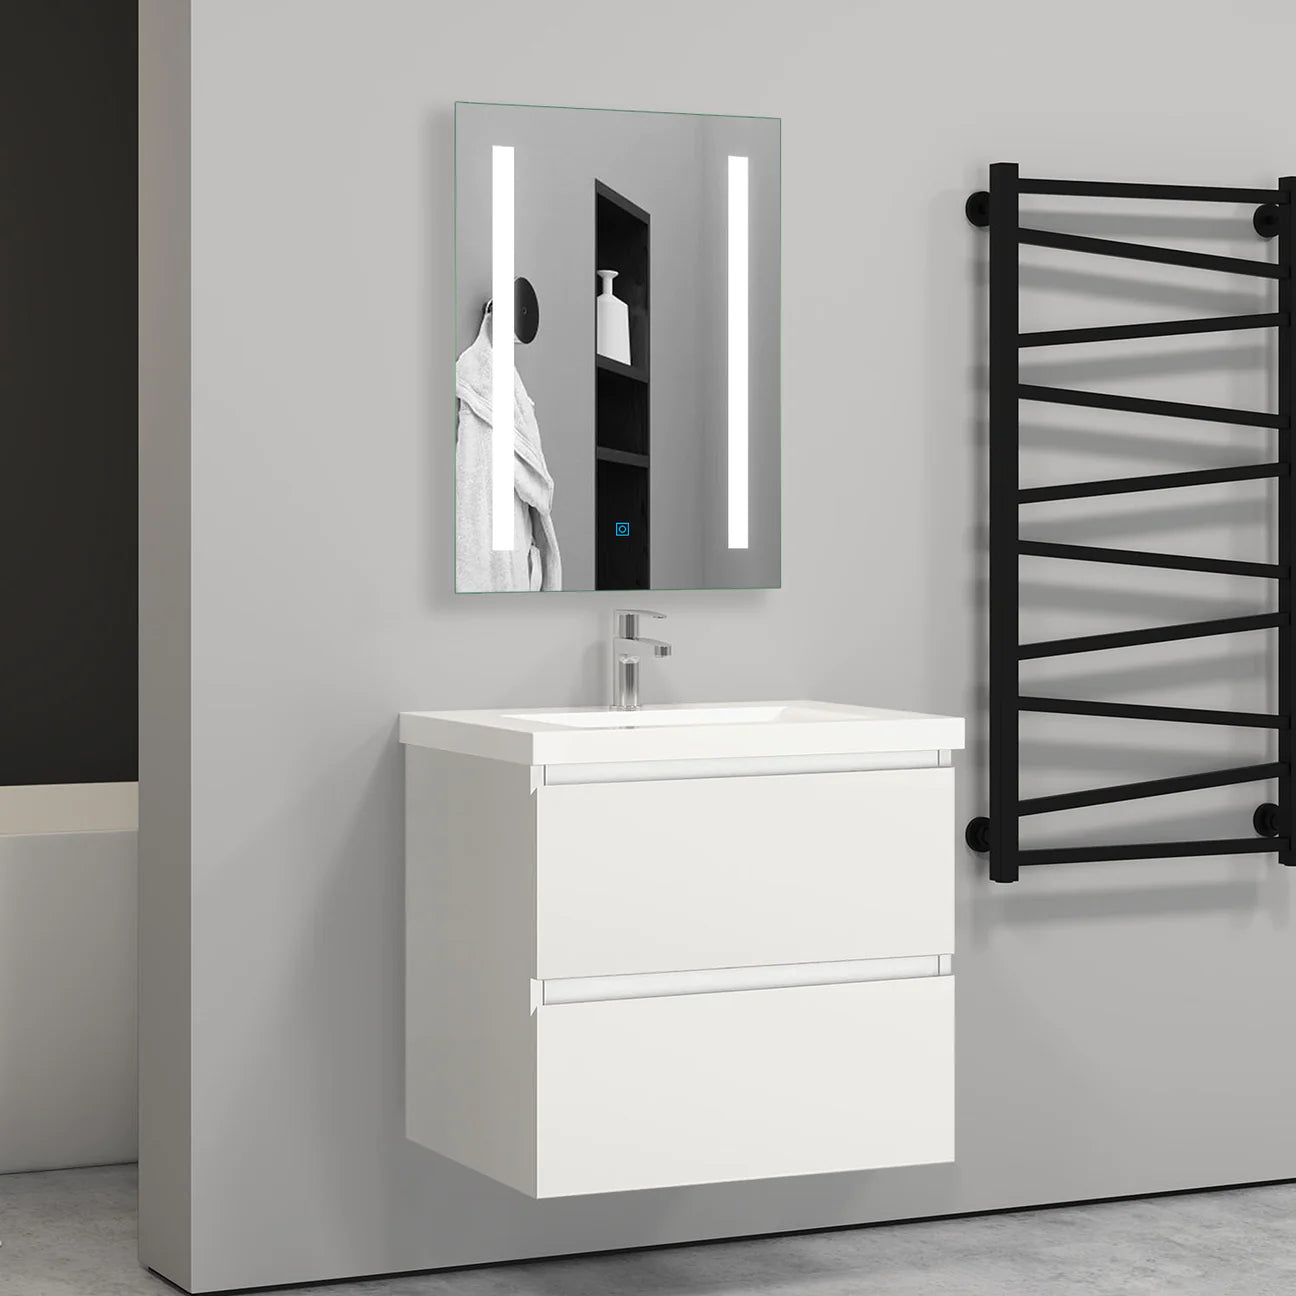 500 600mm Wall Hung Bathroom Vanity Units with Sink,2 Drawers,White